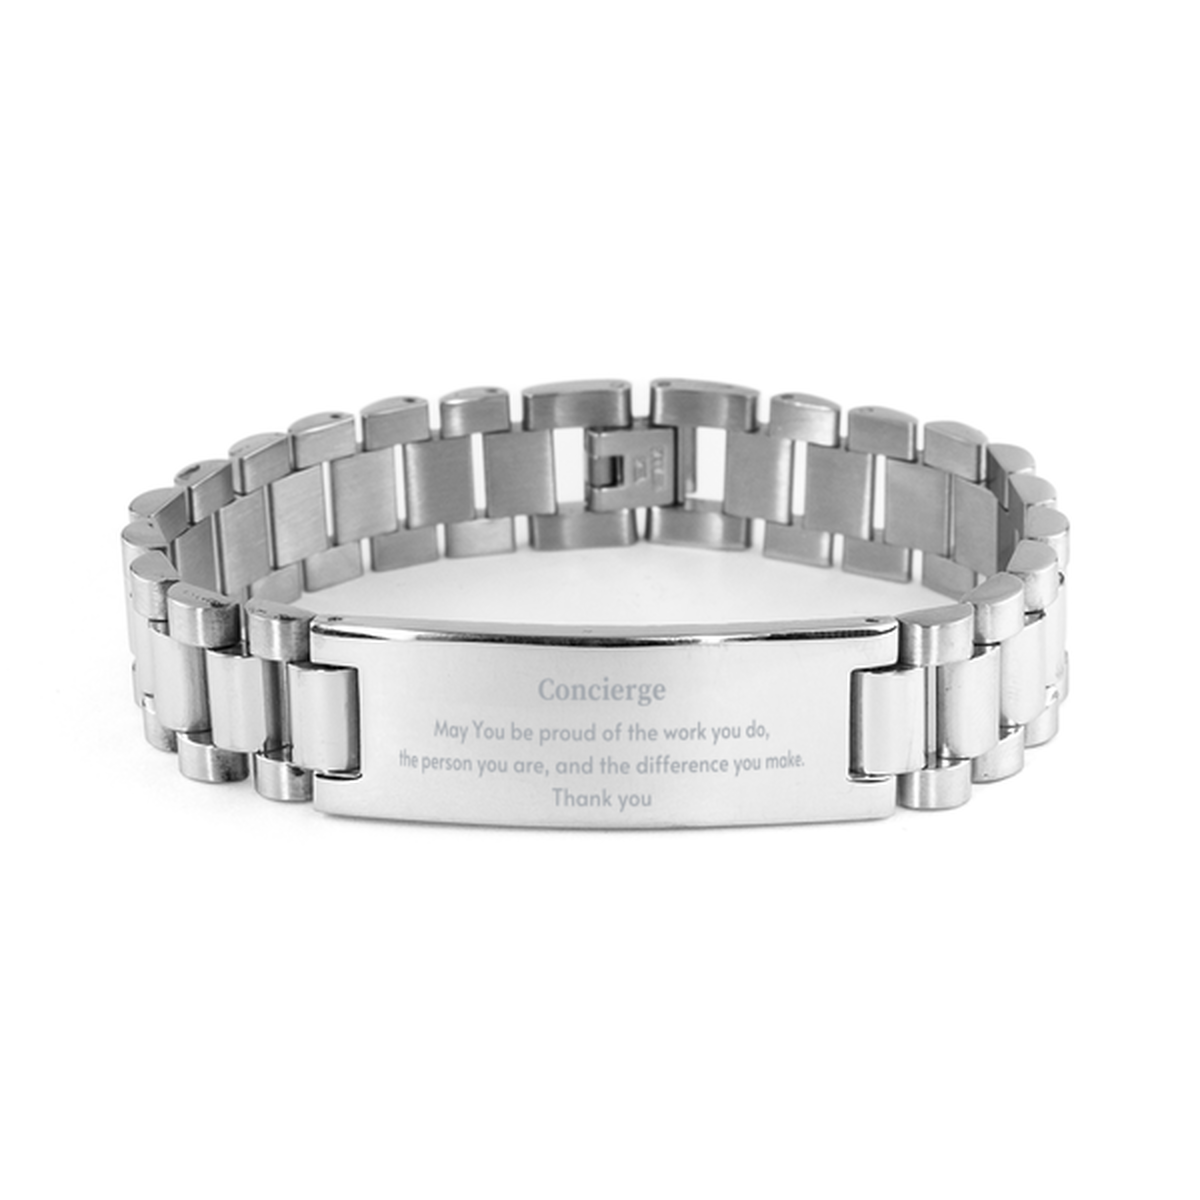 Heartwarming Ladder Stainless Steel Bracelet Retirement Coworkers Gifts for Concierge, Concierge May You be proud of the work you do, the person you are Gifts for Boss Men Women Friends